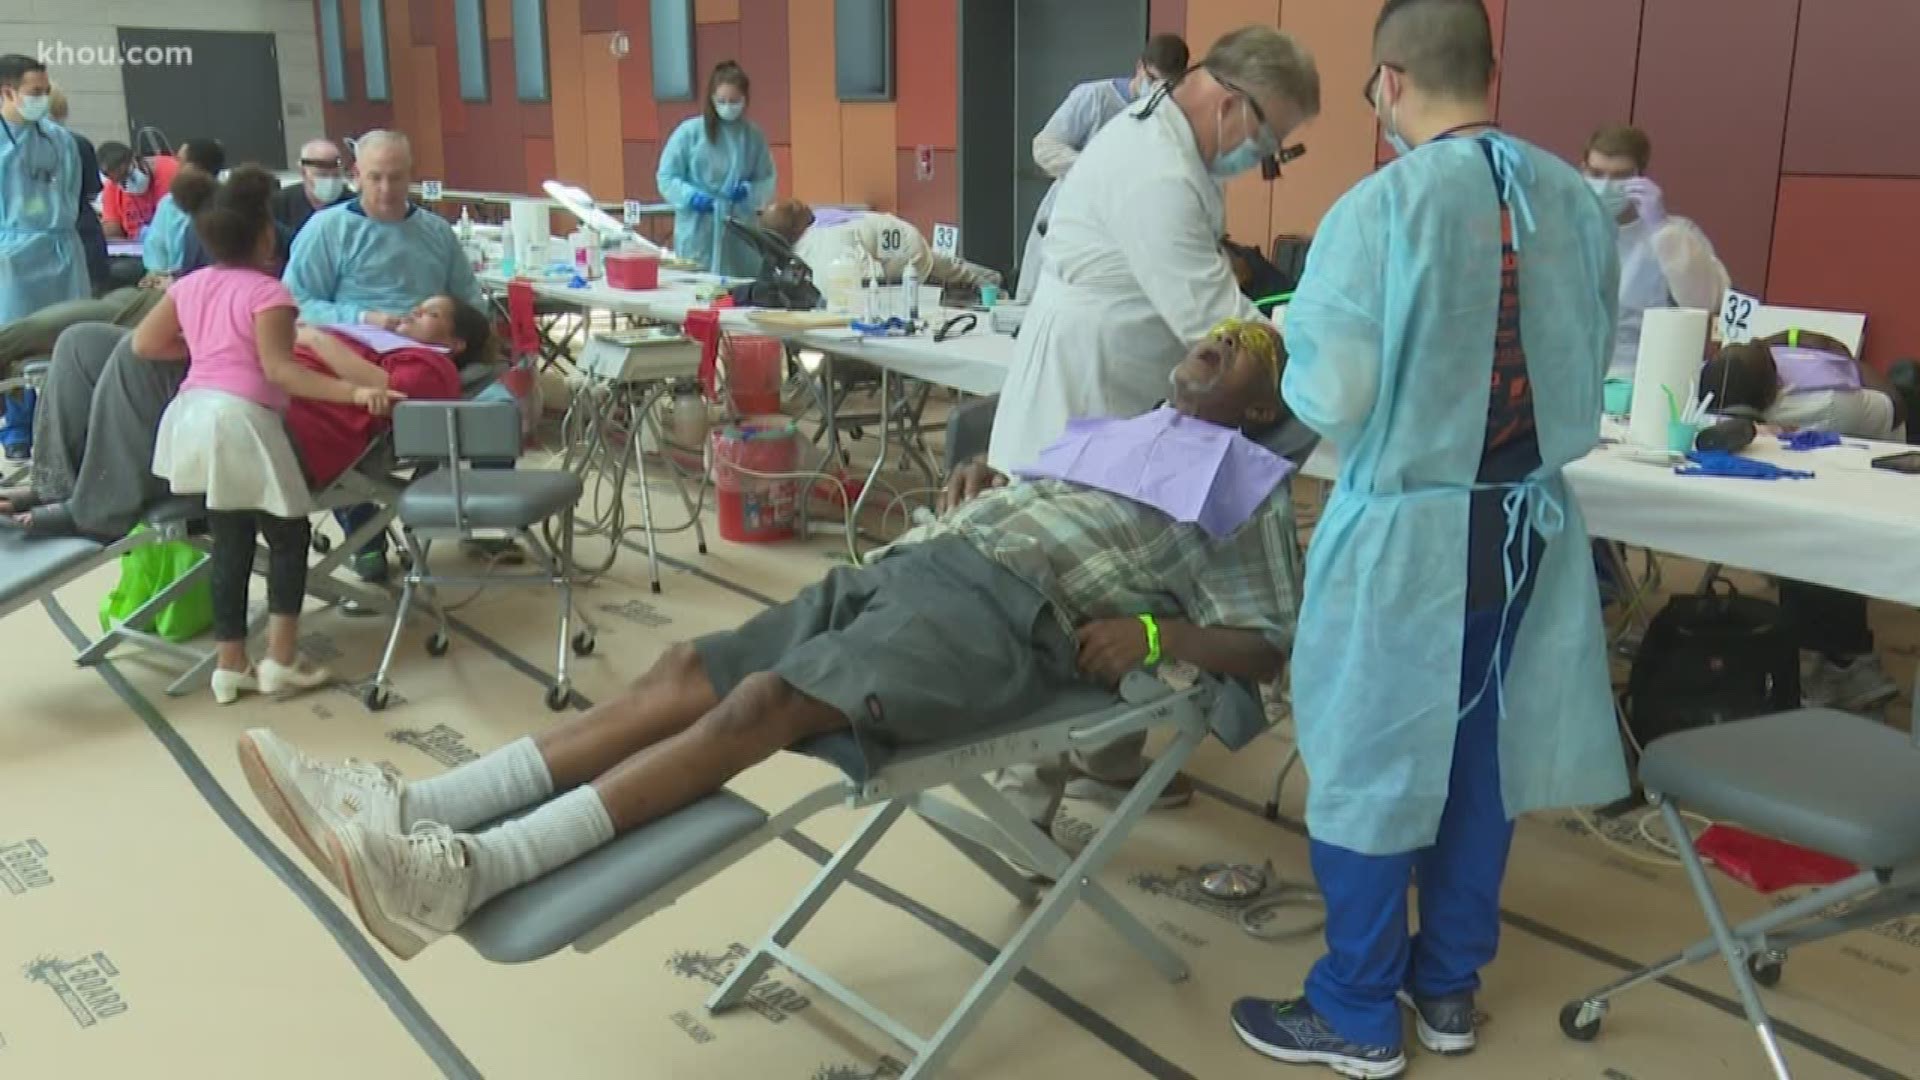 Hundreds got free dental care Friday, anything from cleanings, to screenings to dentures. It's all part of a free clinic designed to give dental care to those who can’t normally afford it.